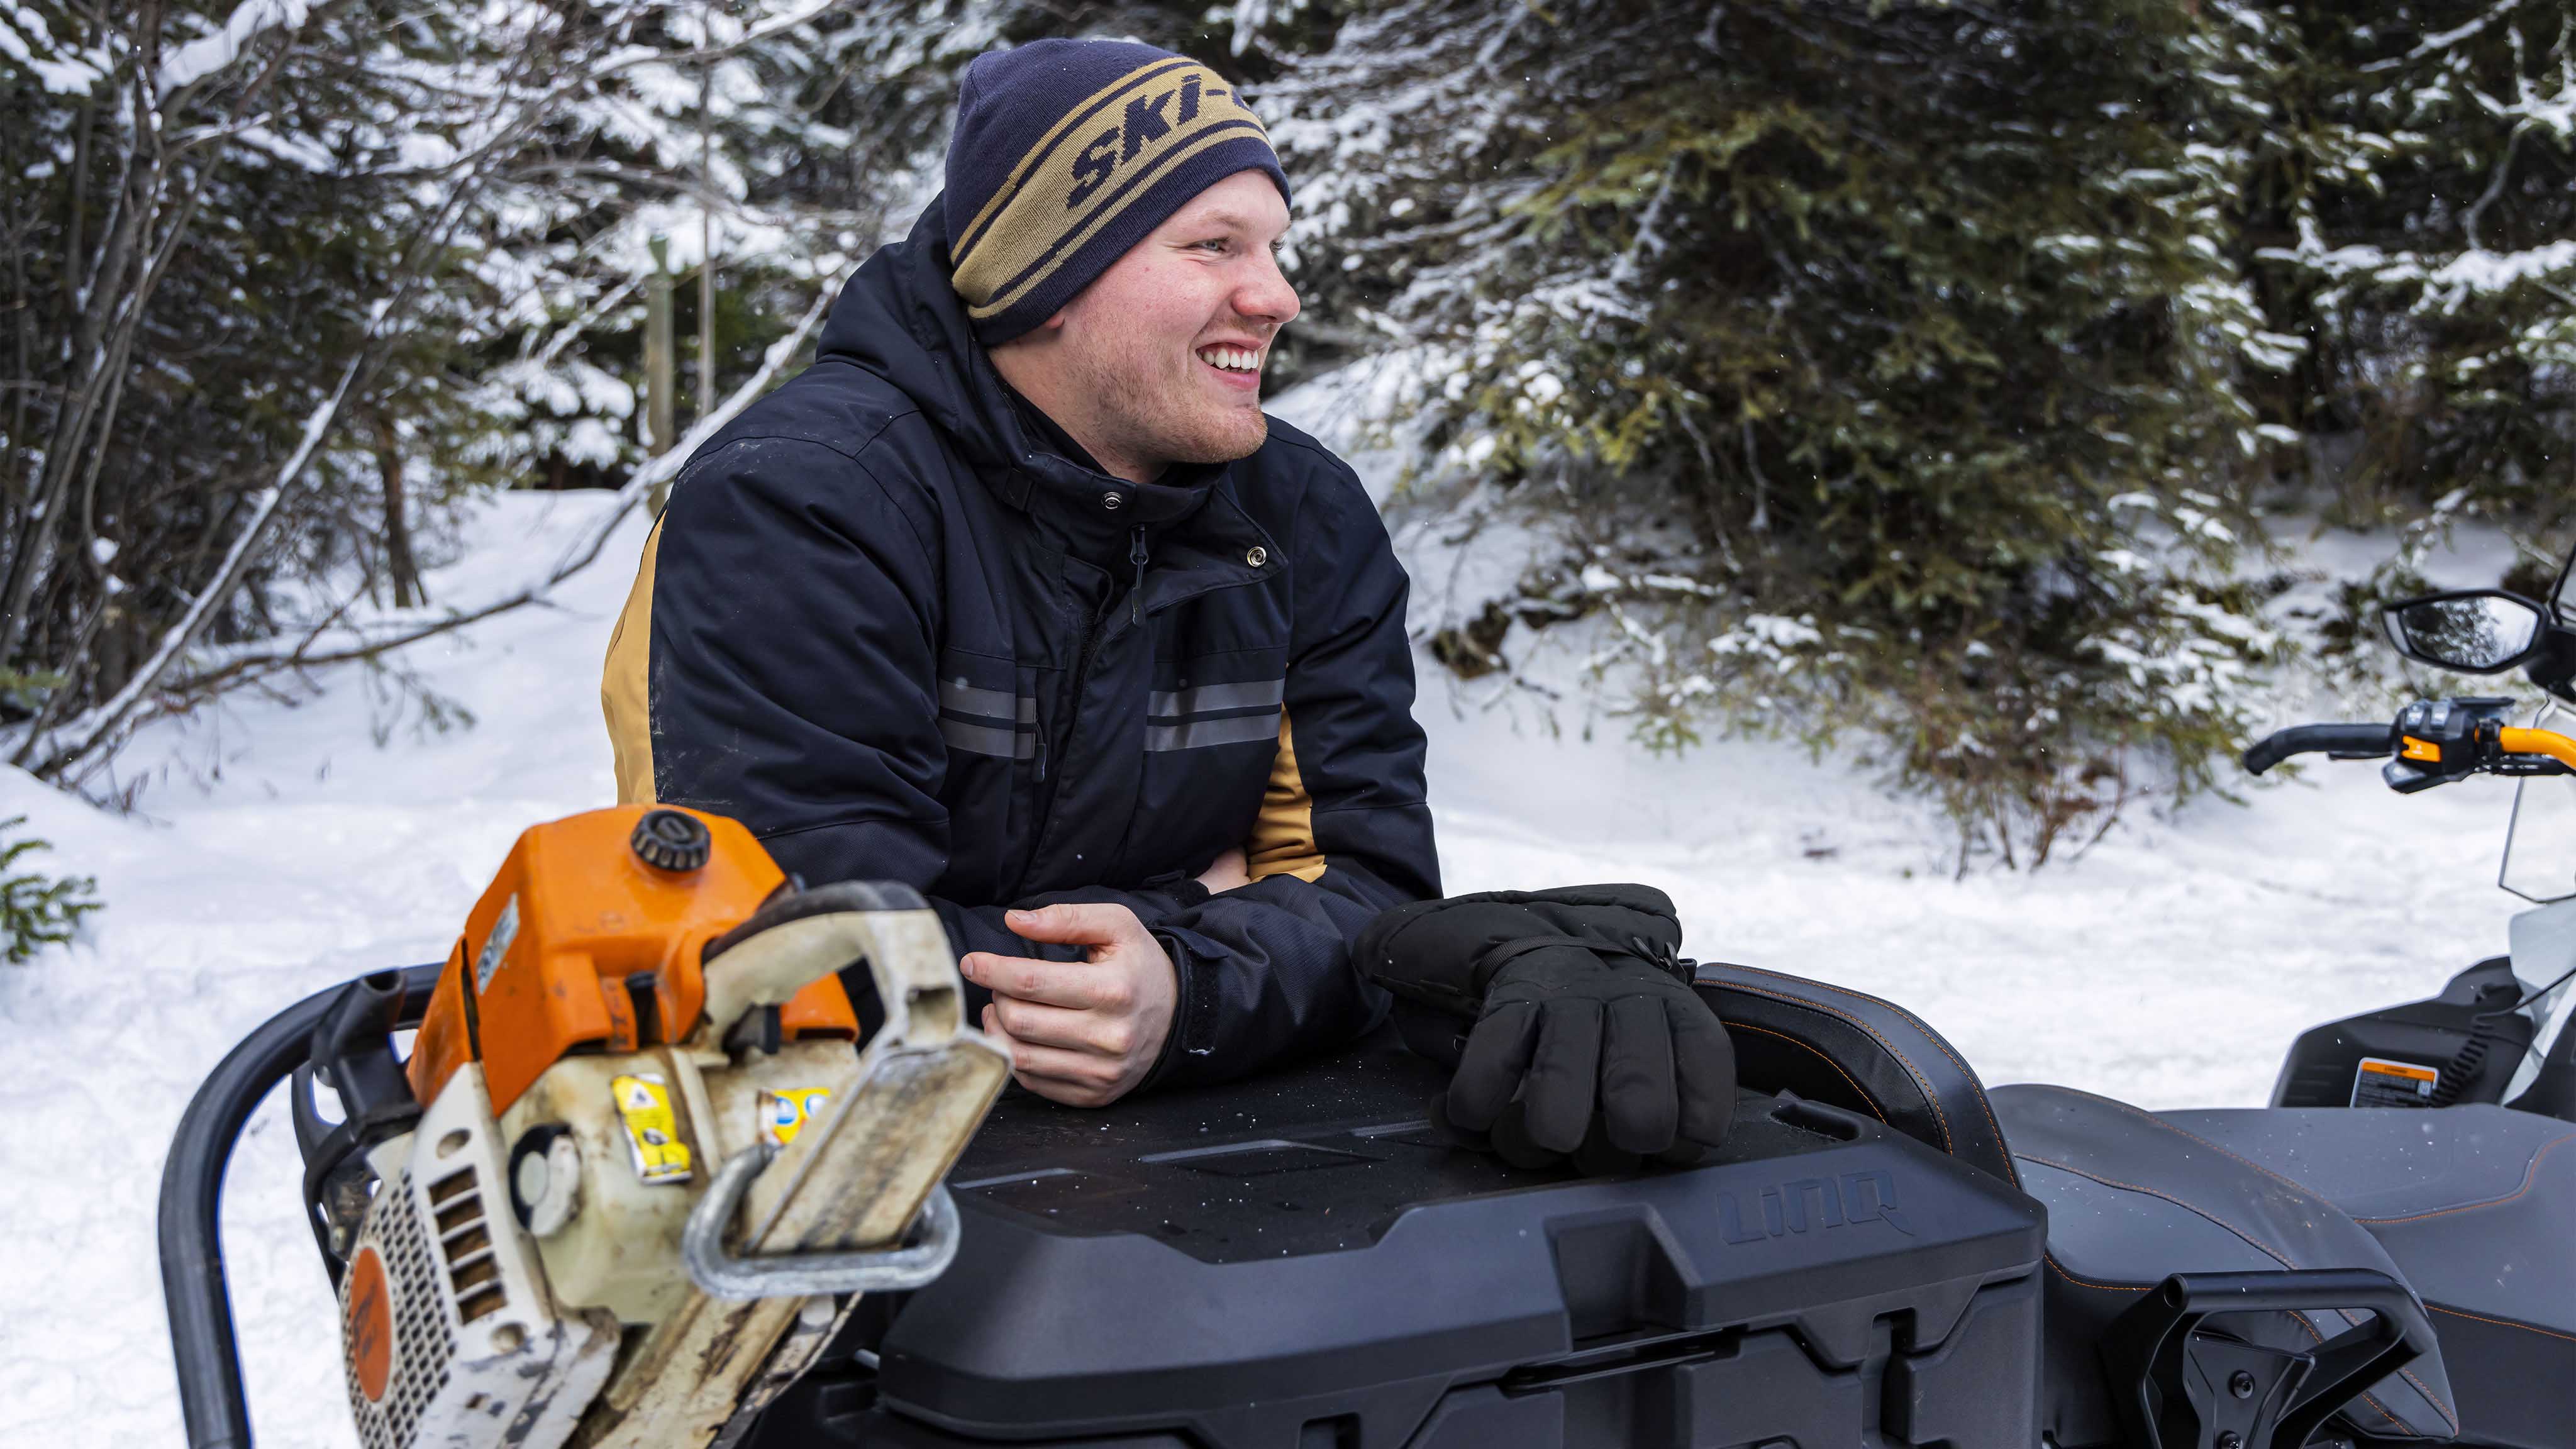 Man wearing the Ski-Doo Warmth in Trail gear collection